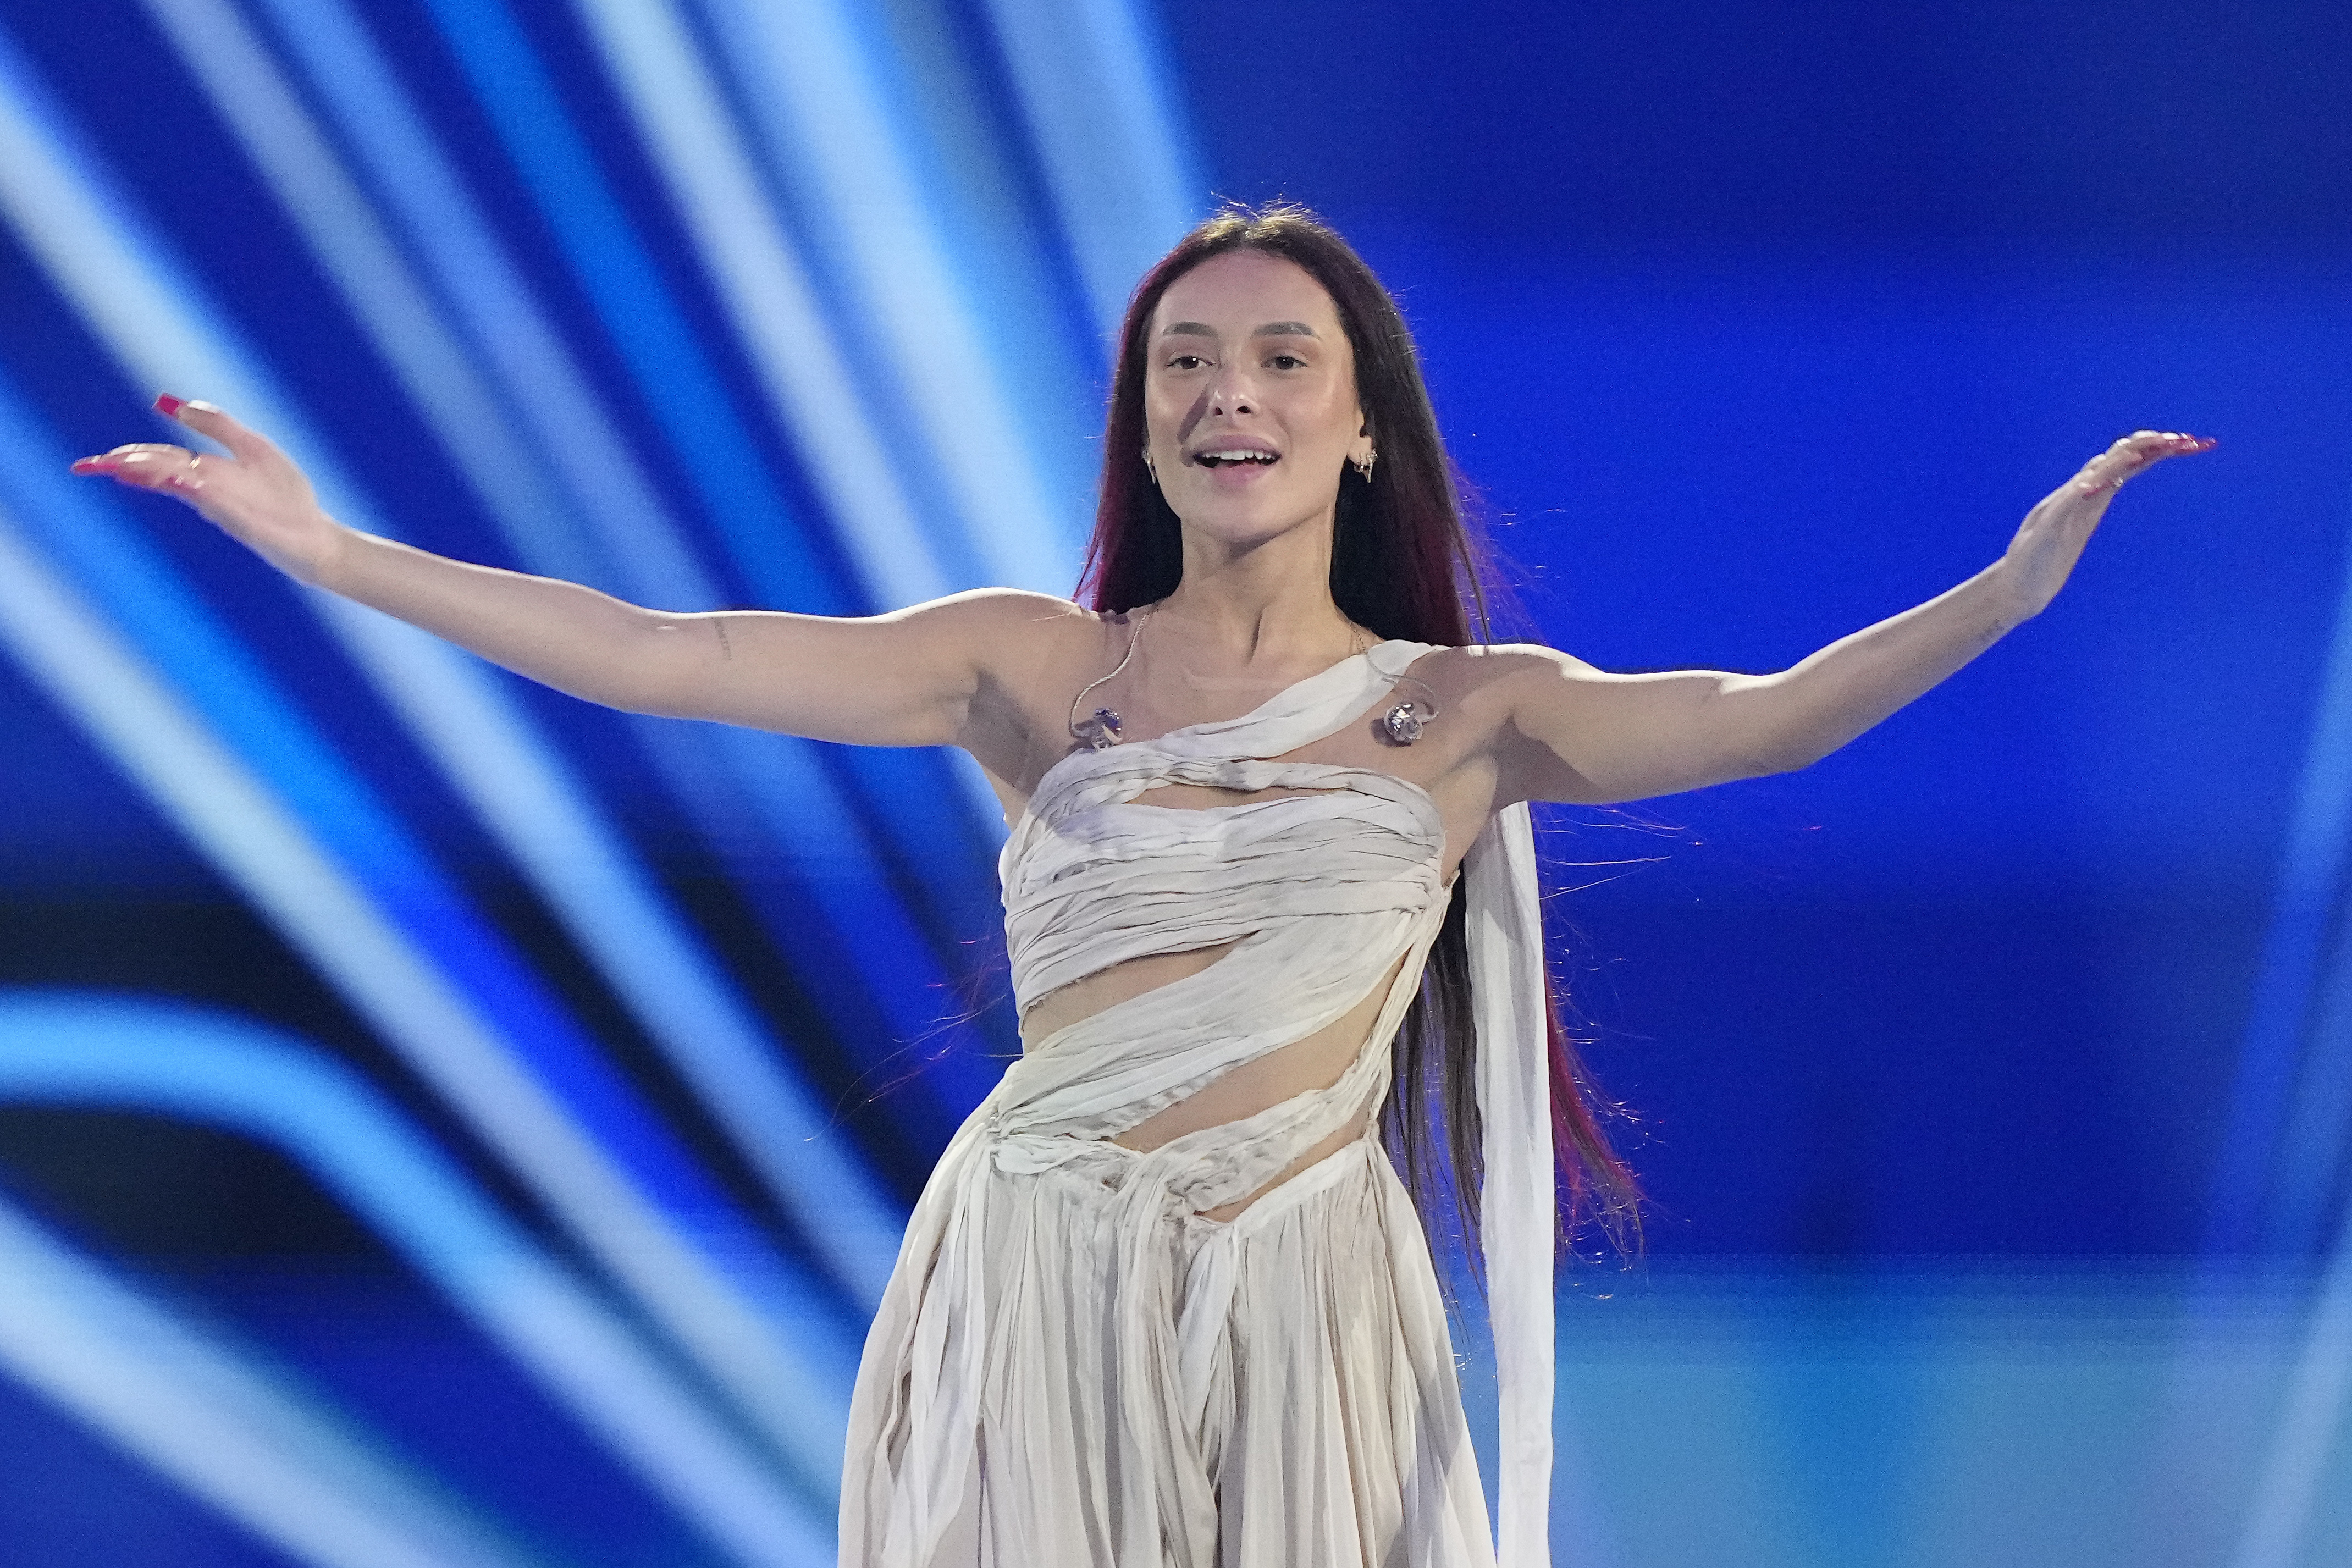 Eden Golan from Israel has faced criticism for her inclusion in Eurovision from her fellow competitors and the raging public